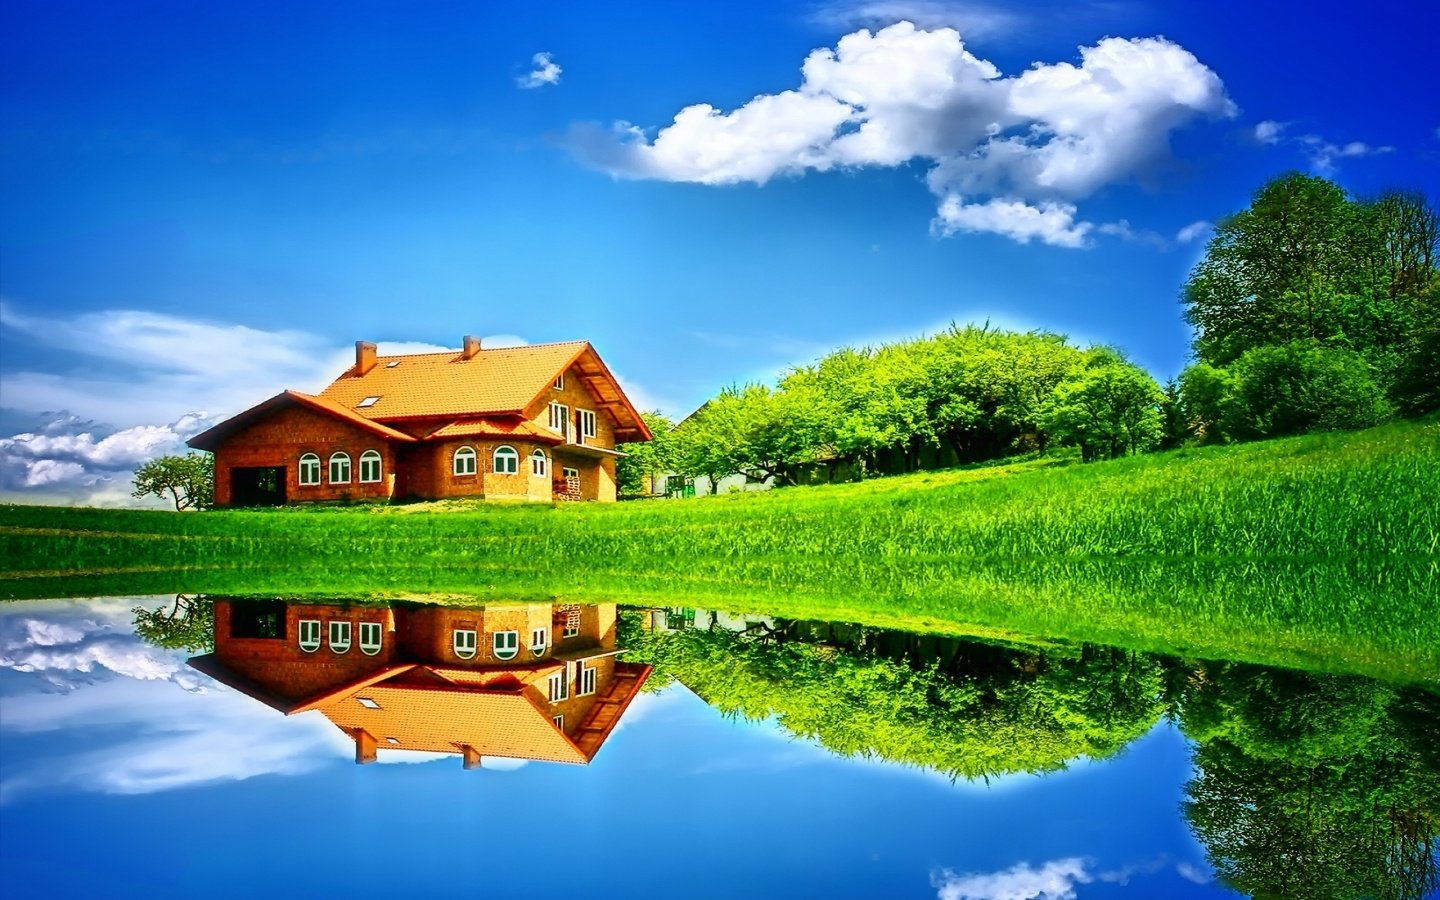 My Dream House Wallpaper The Art Mad Wallpapers